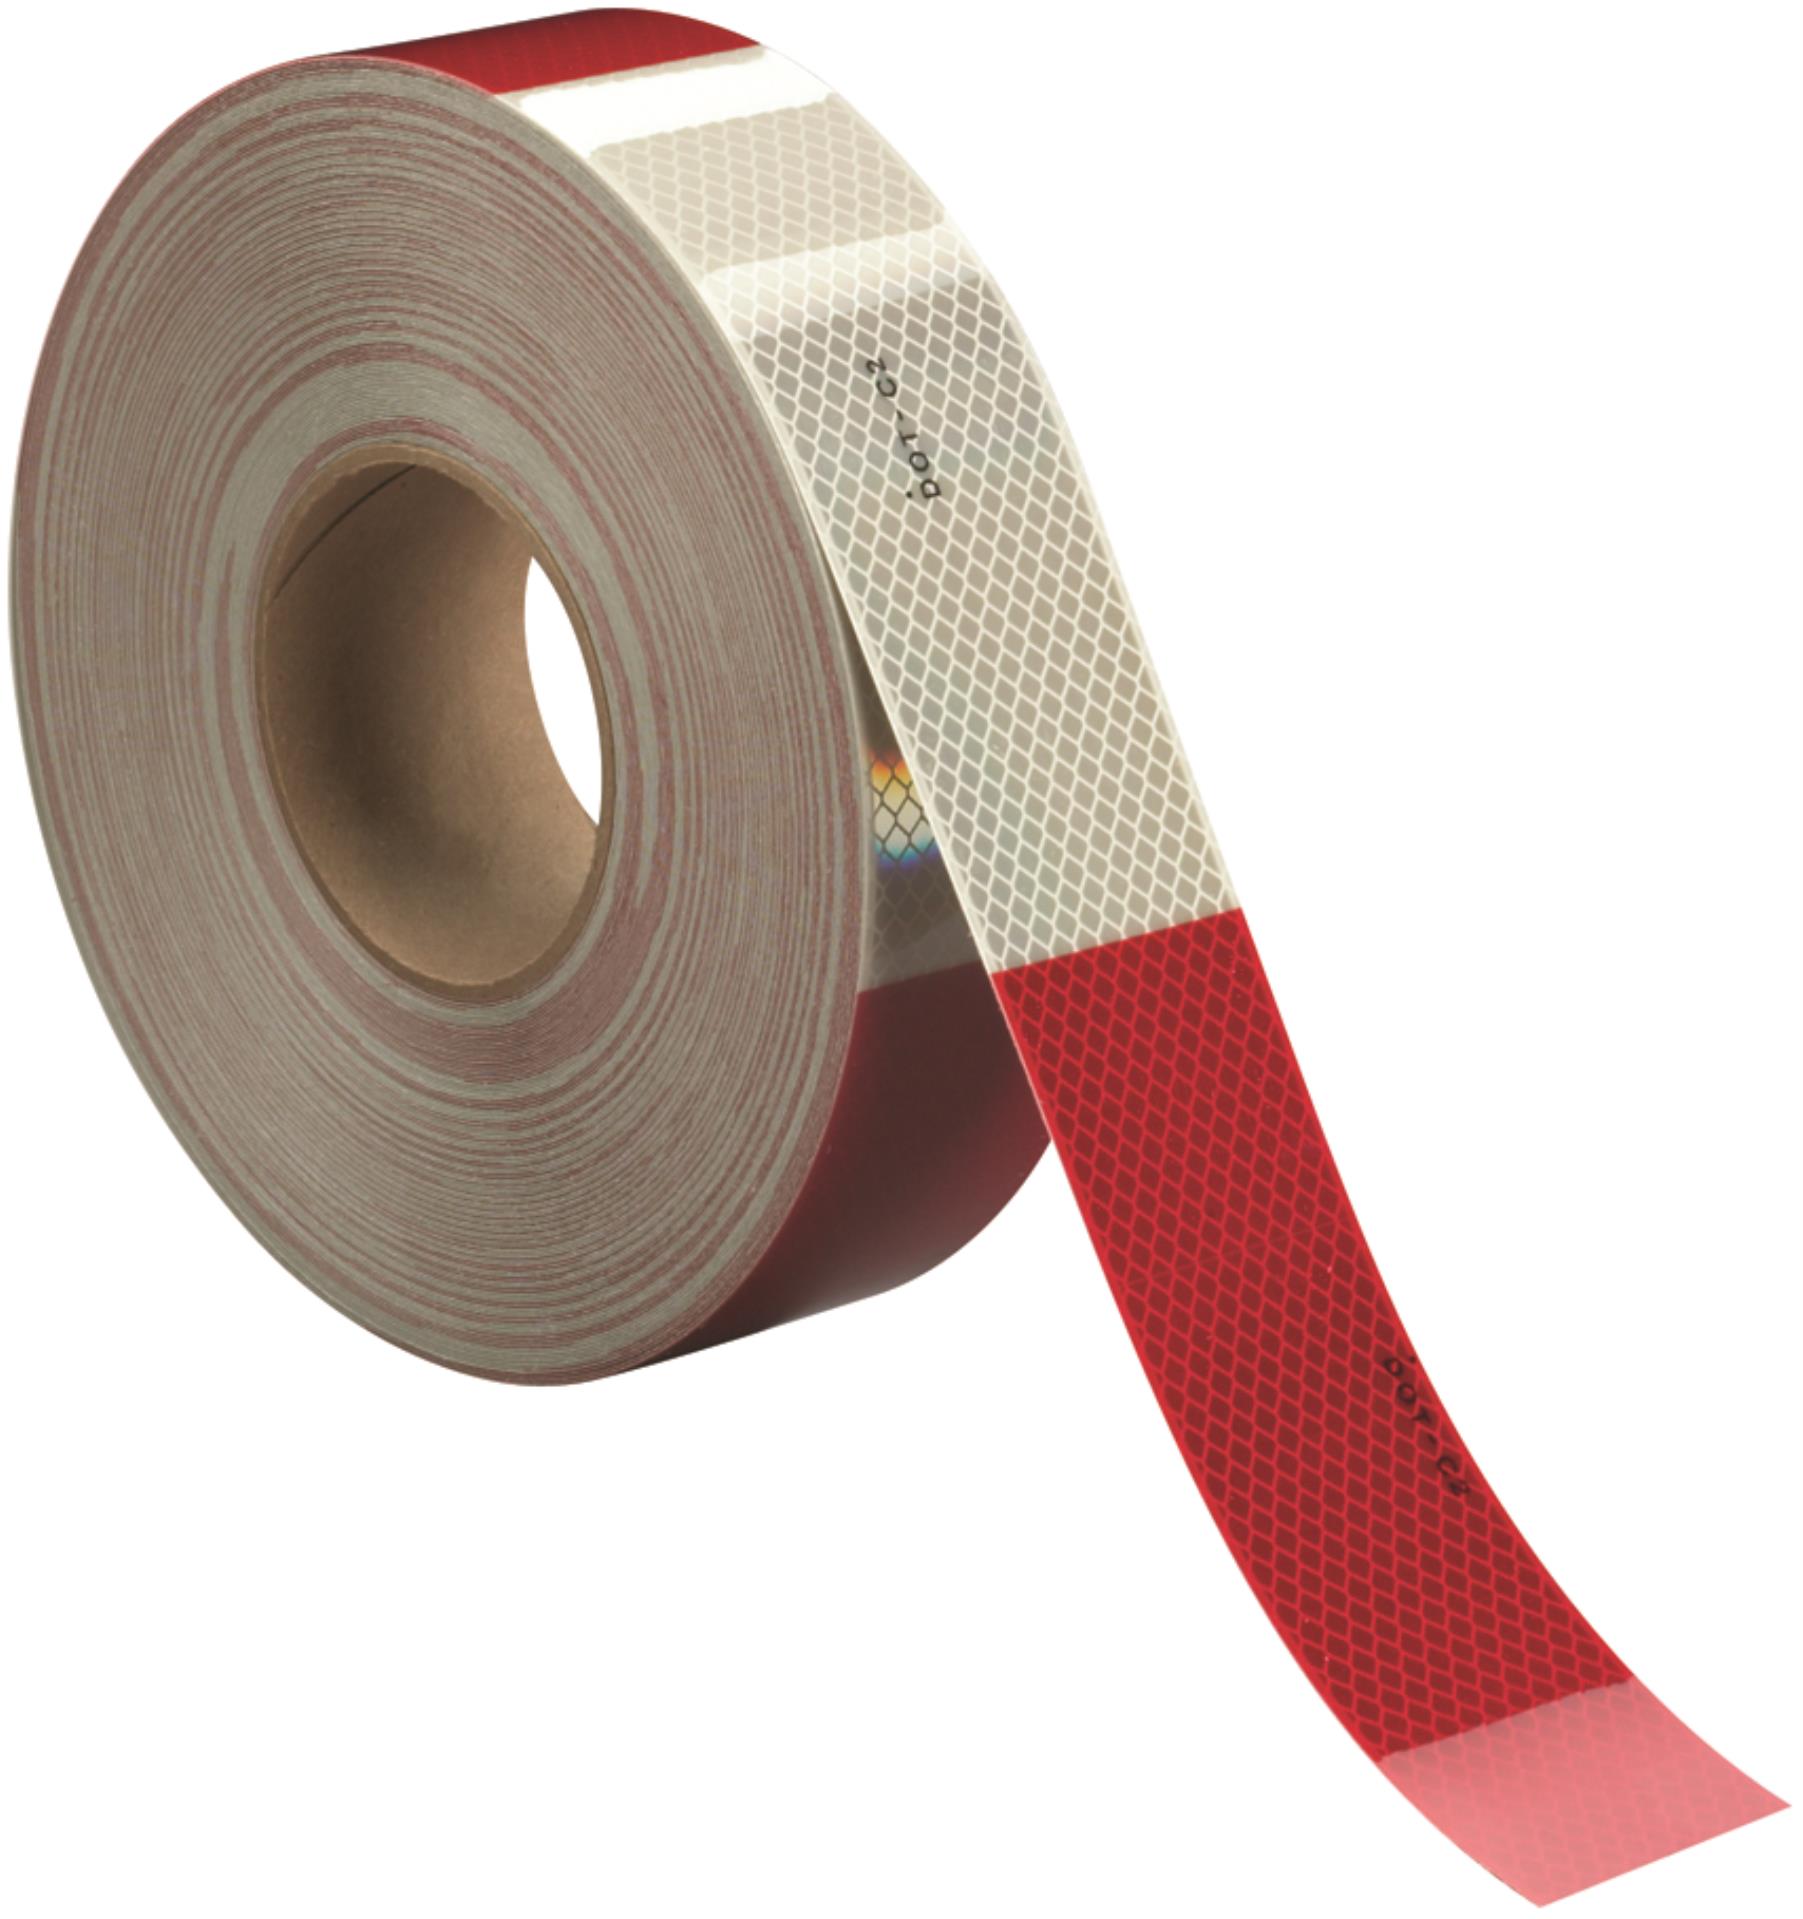 Tape Roll for Permanent Bonding x 15 ft 3M 4026 Natural Polyurethane Double Coated Foam Tape Adhesives and Tapes 0.375 in